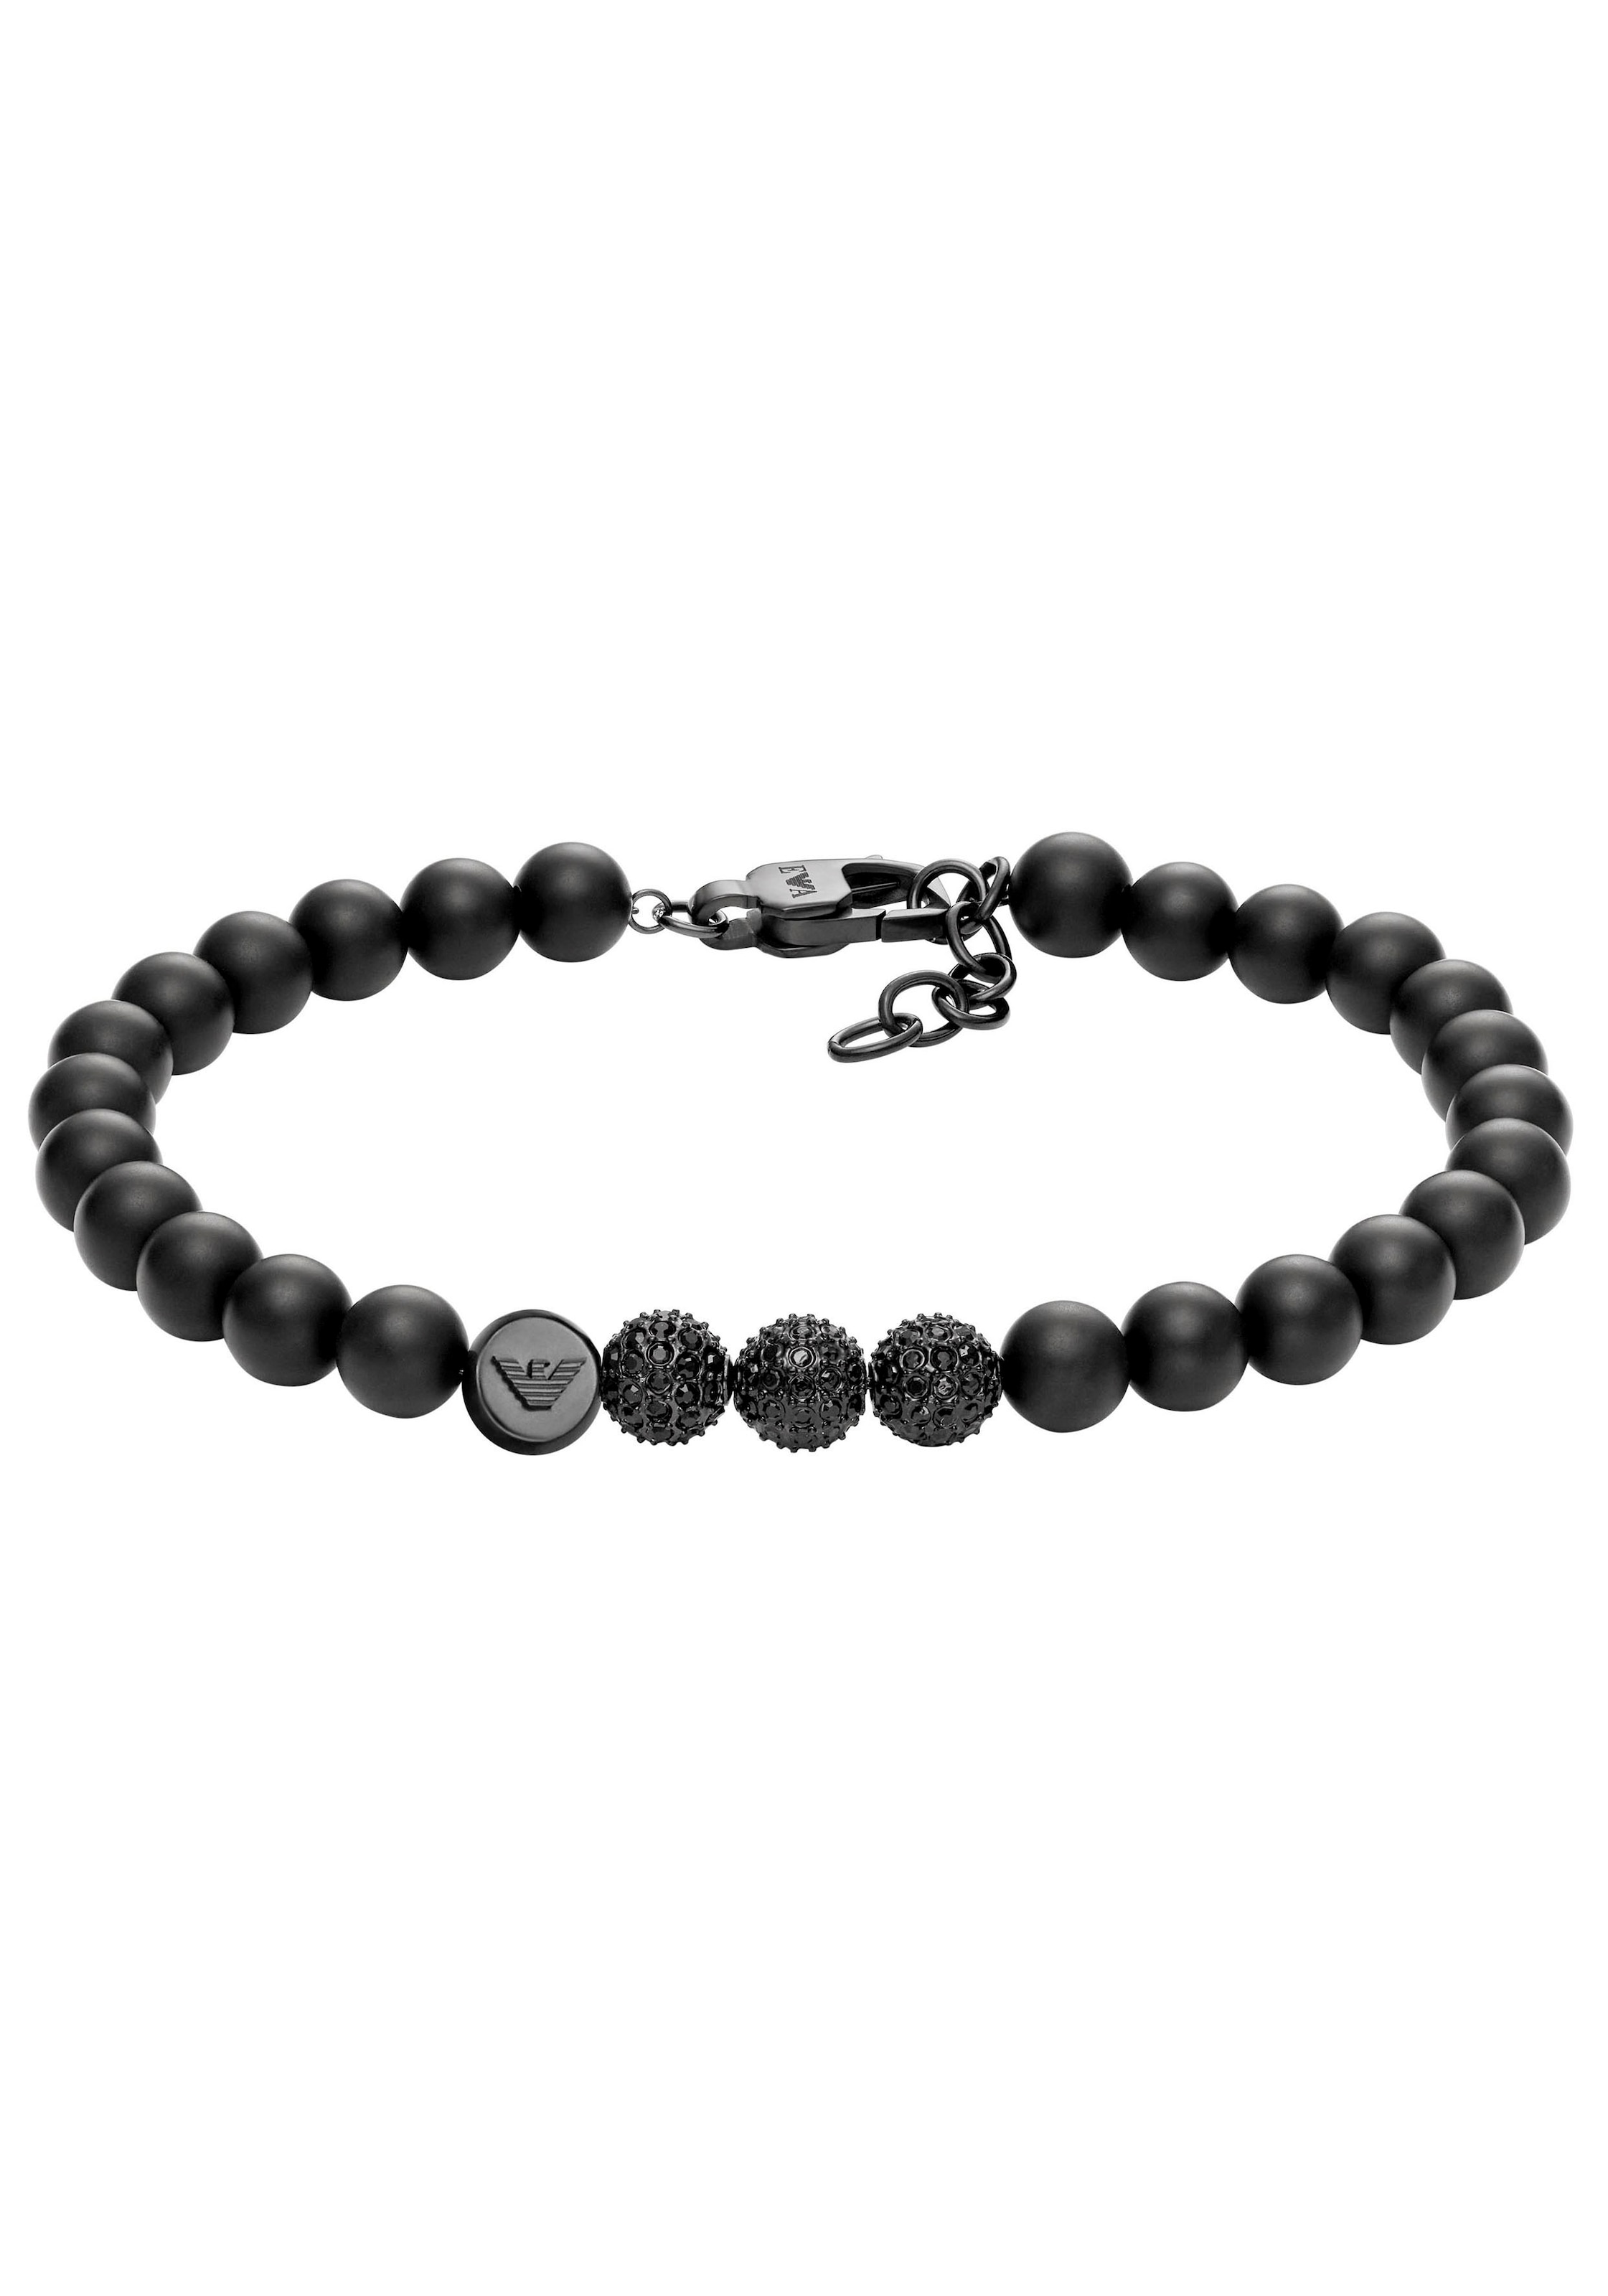 BAUR Onyx PAVE, und Emporio »ICONIC | BEADS Armband Armani TREND, Gagat AND mit EGS3030001«,